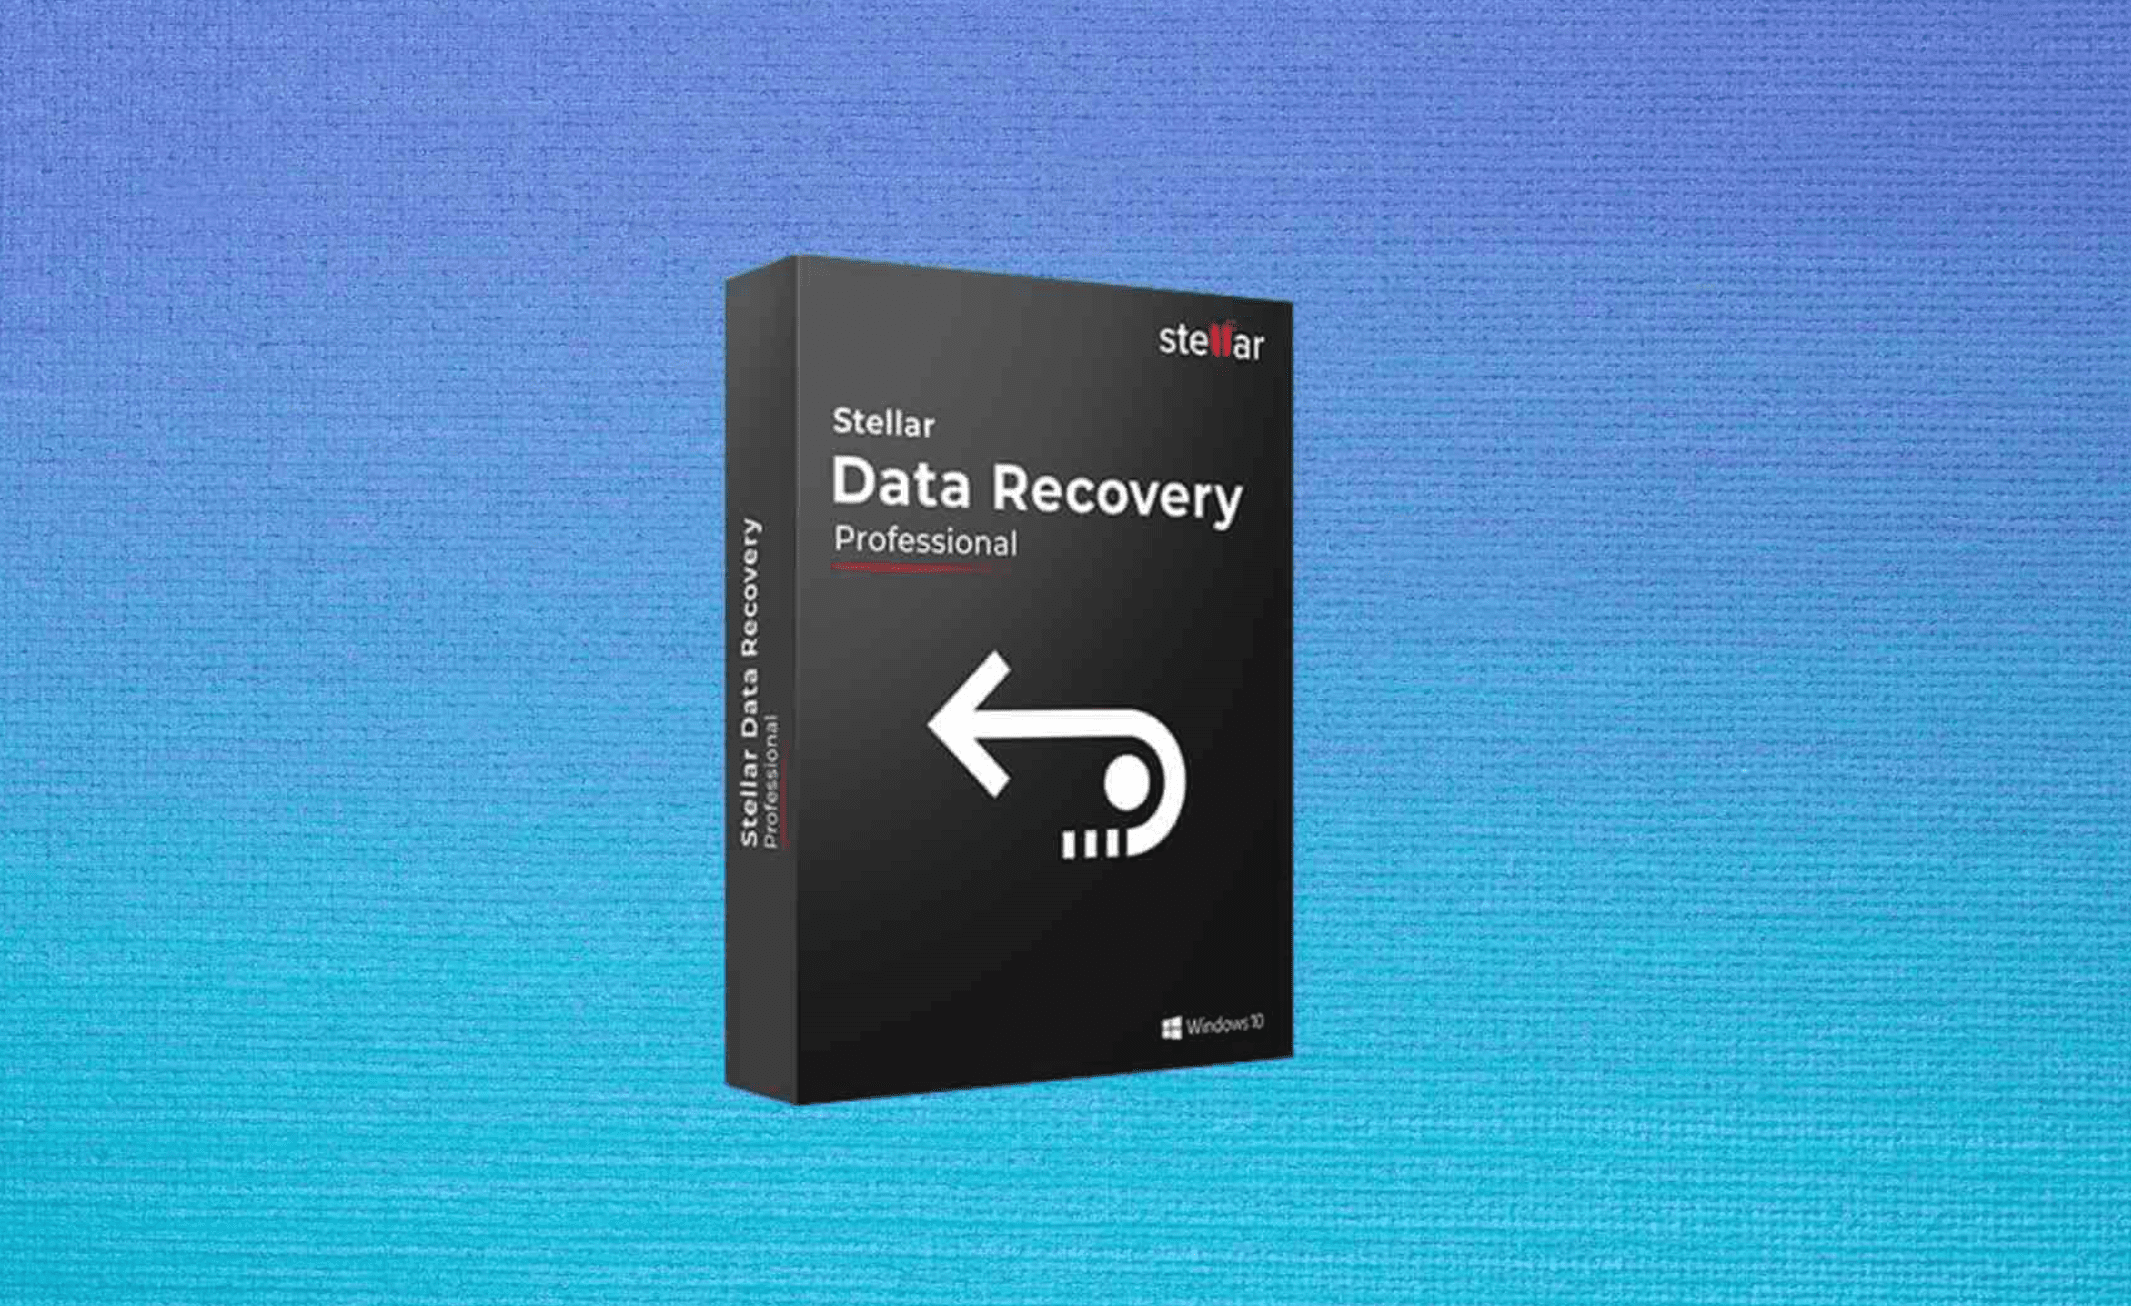 The image shows data recovery software on a blue background. It may be related to Stellar Data Recovery Crack.